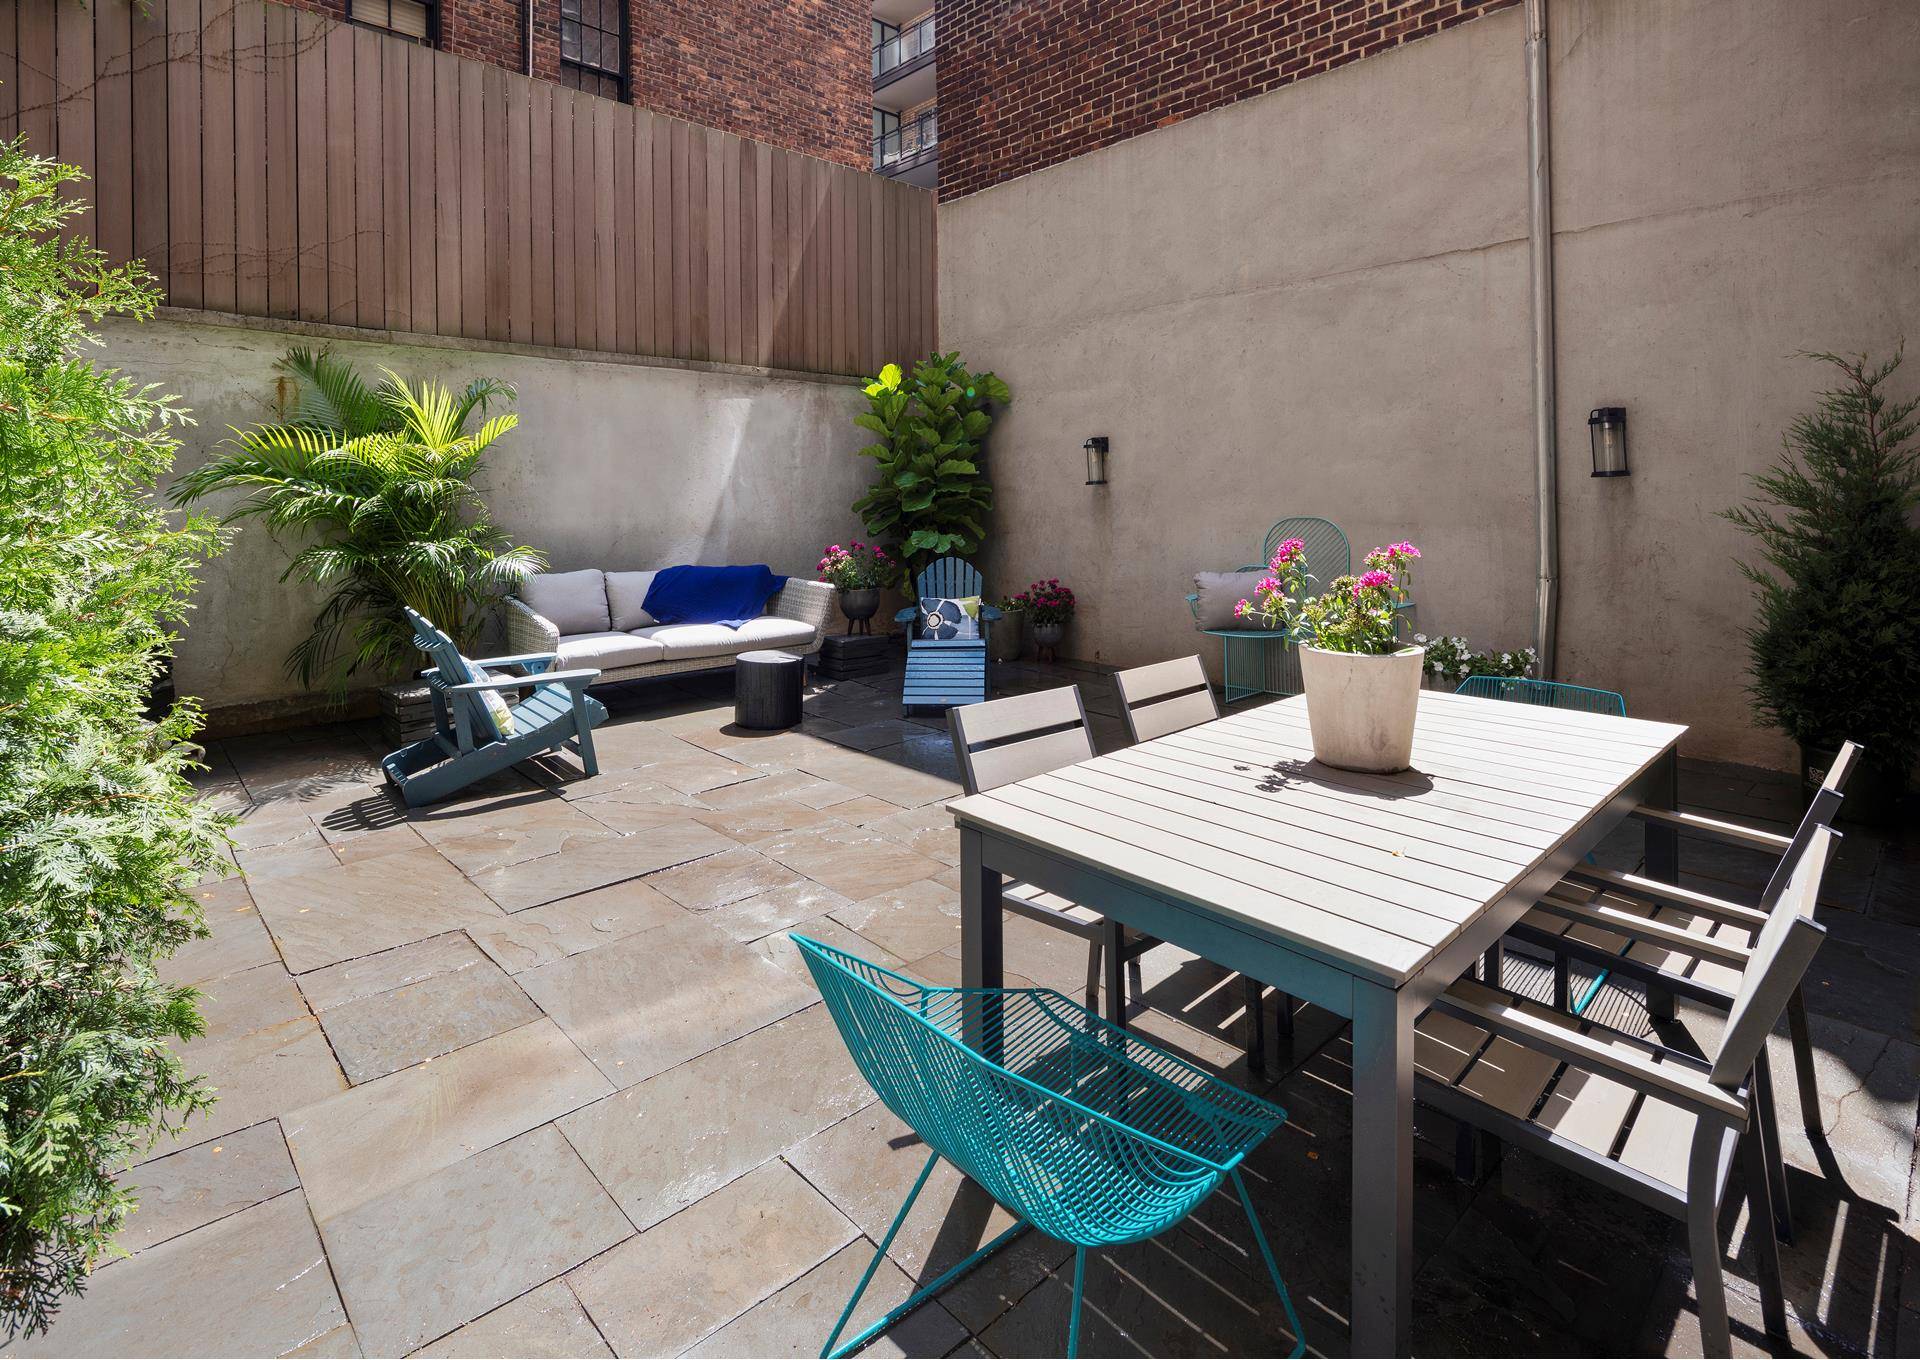 This amazing home gives you a LARGE 500 Square Foot PRIVATE PATIO GARDEN.